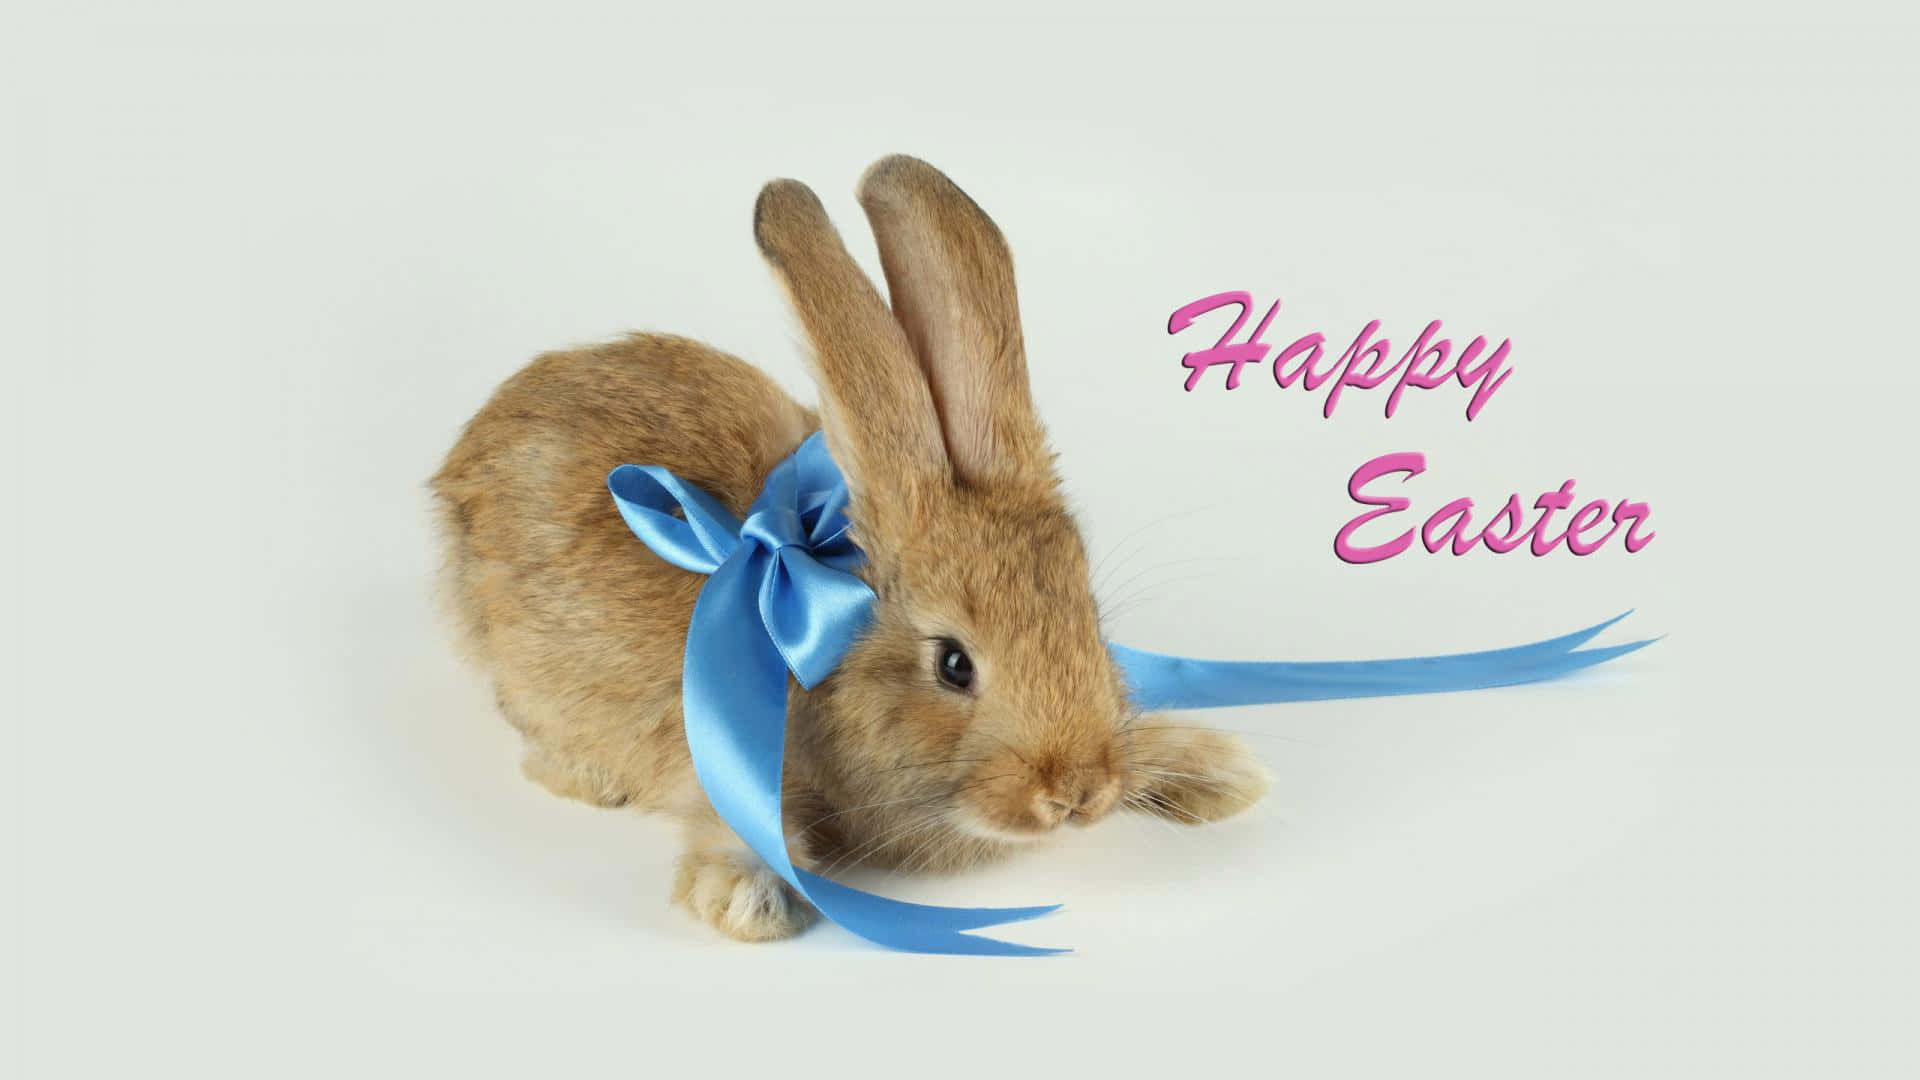 Celebrate Easter With Adorable Rabbits Wallpaper